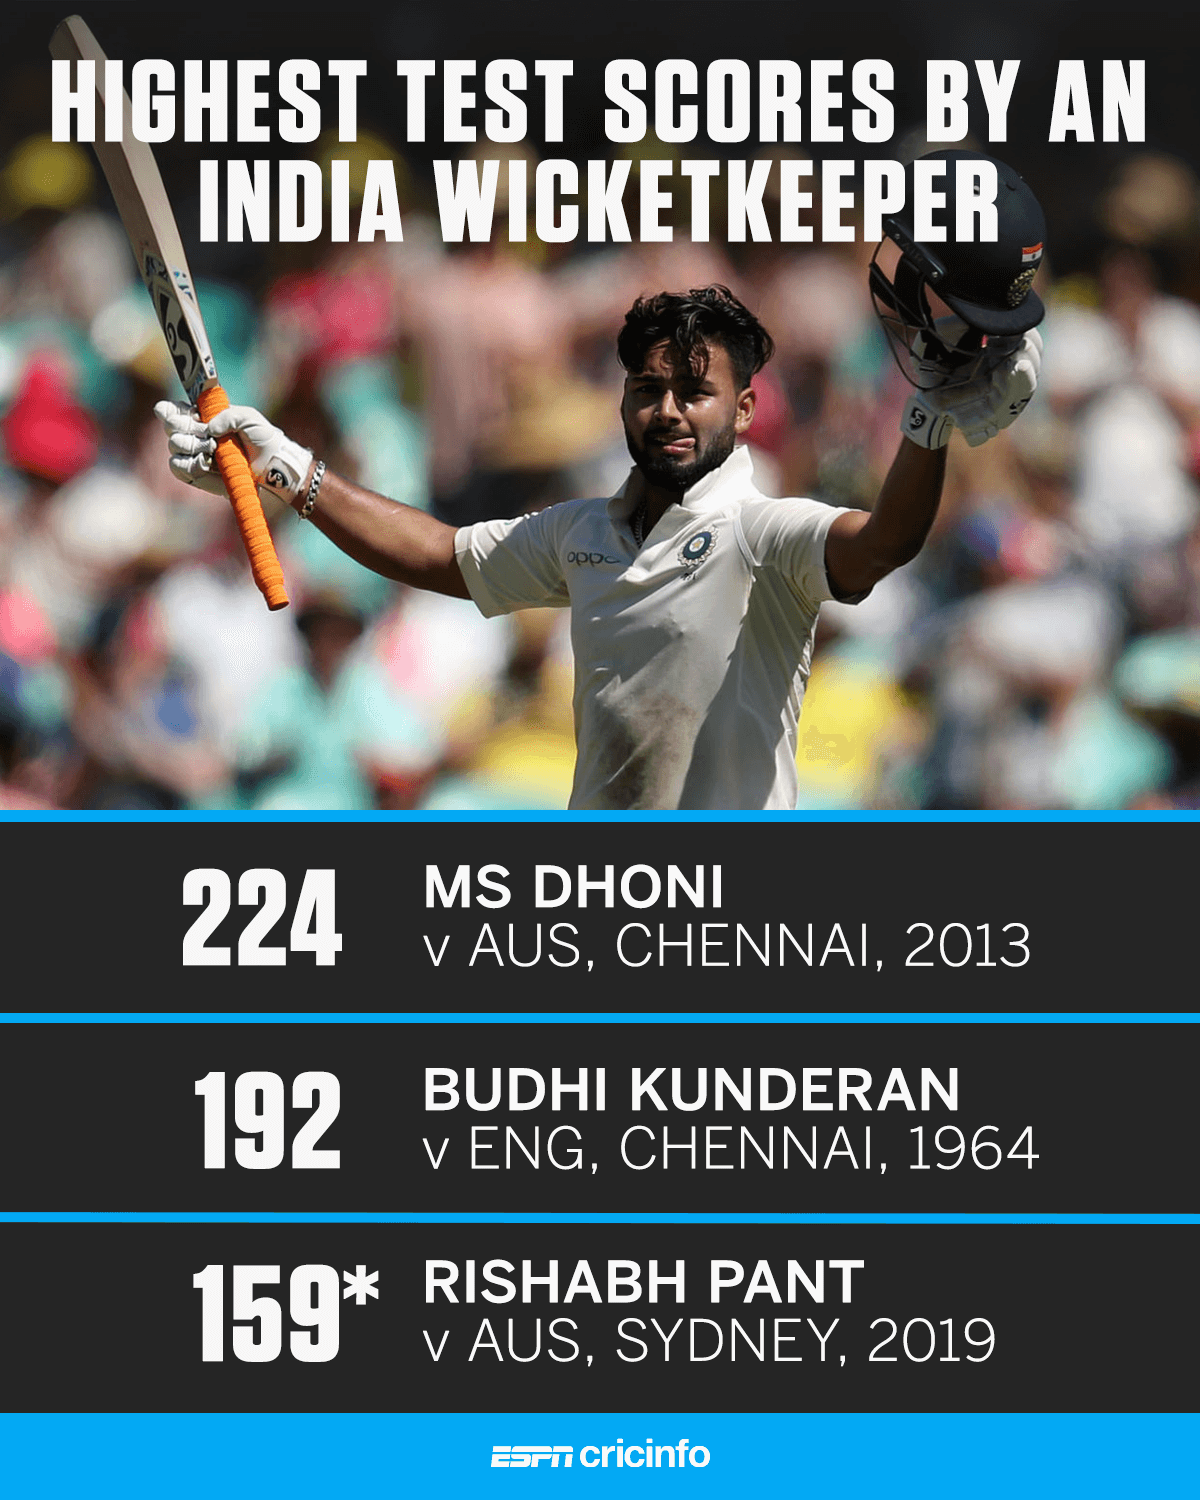 Rishabh Pants 159* is the third-highest score by an India wicketkeeper in Tests ESPNcricinfo